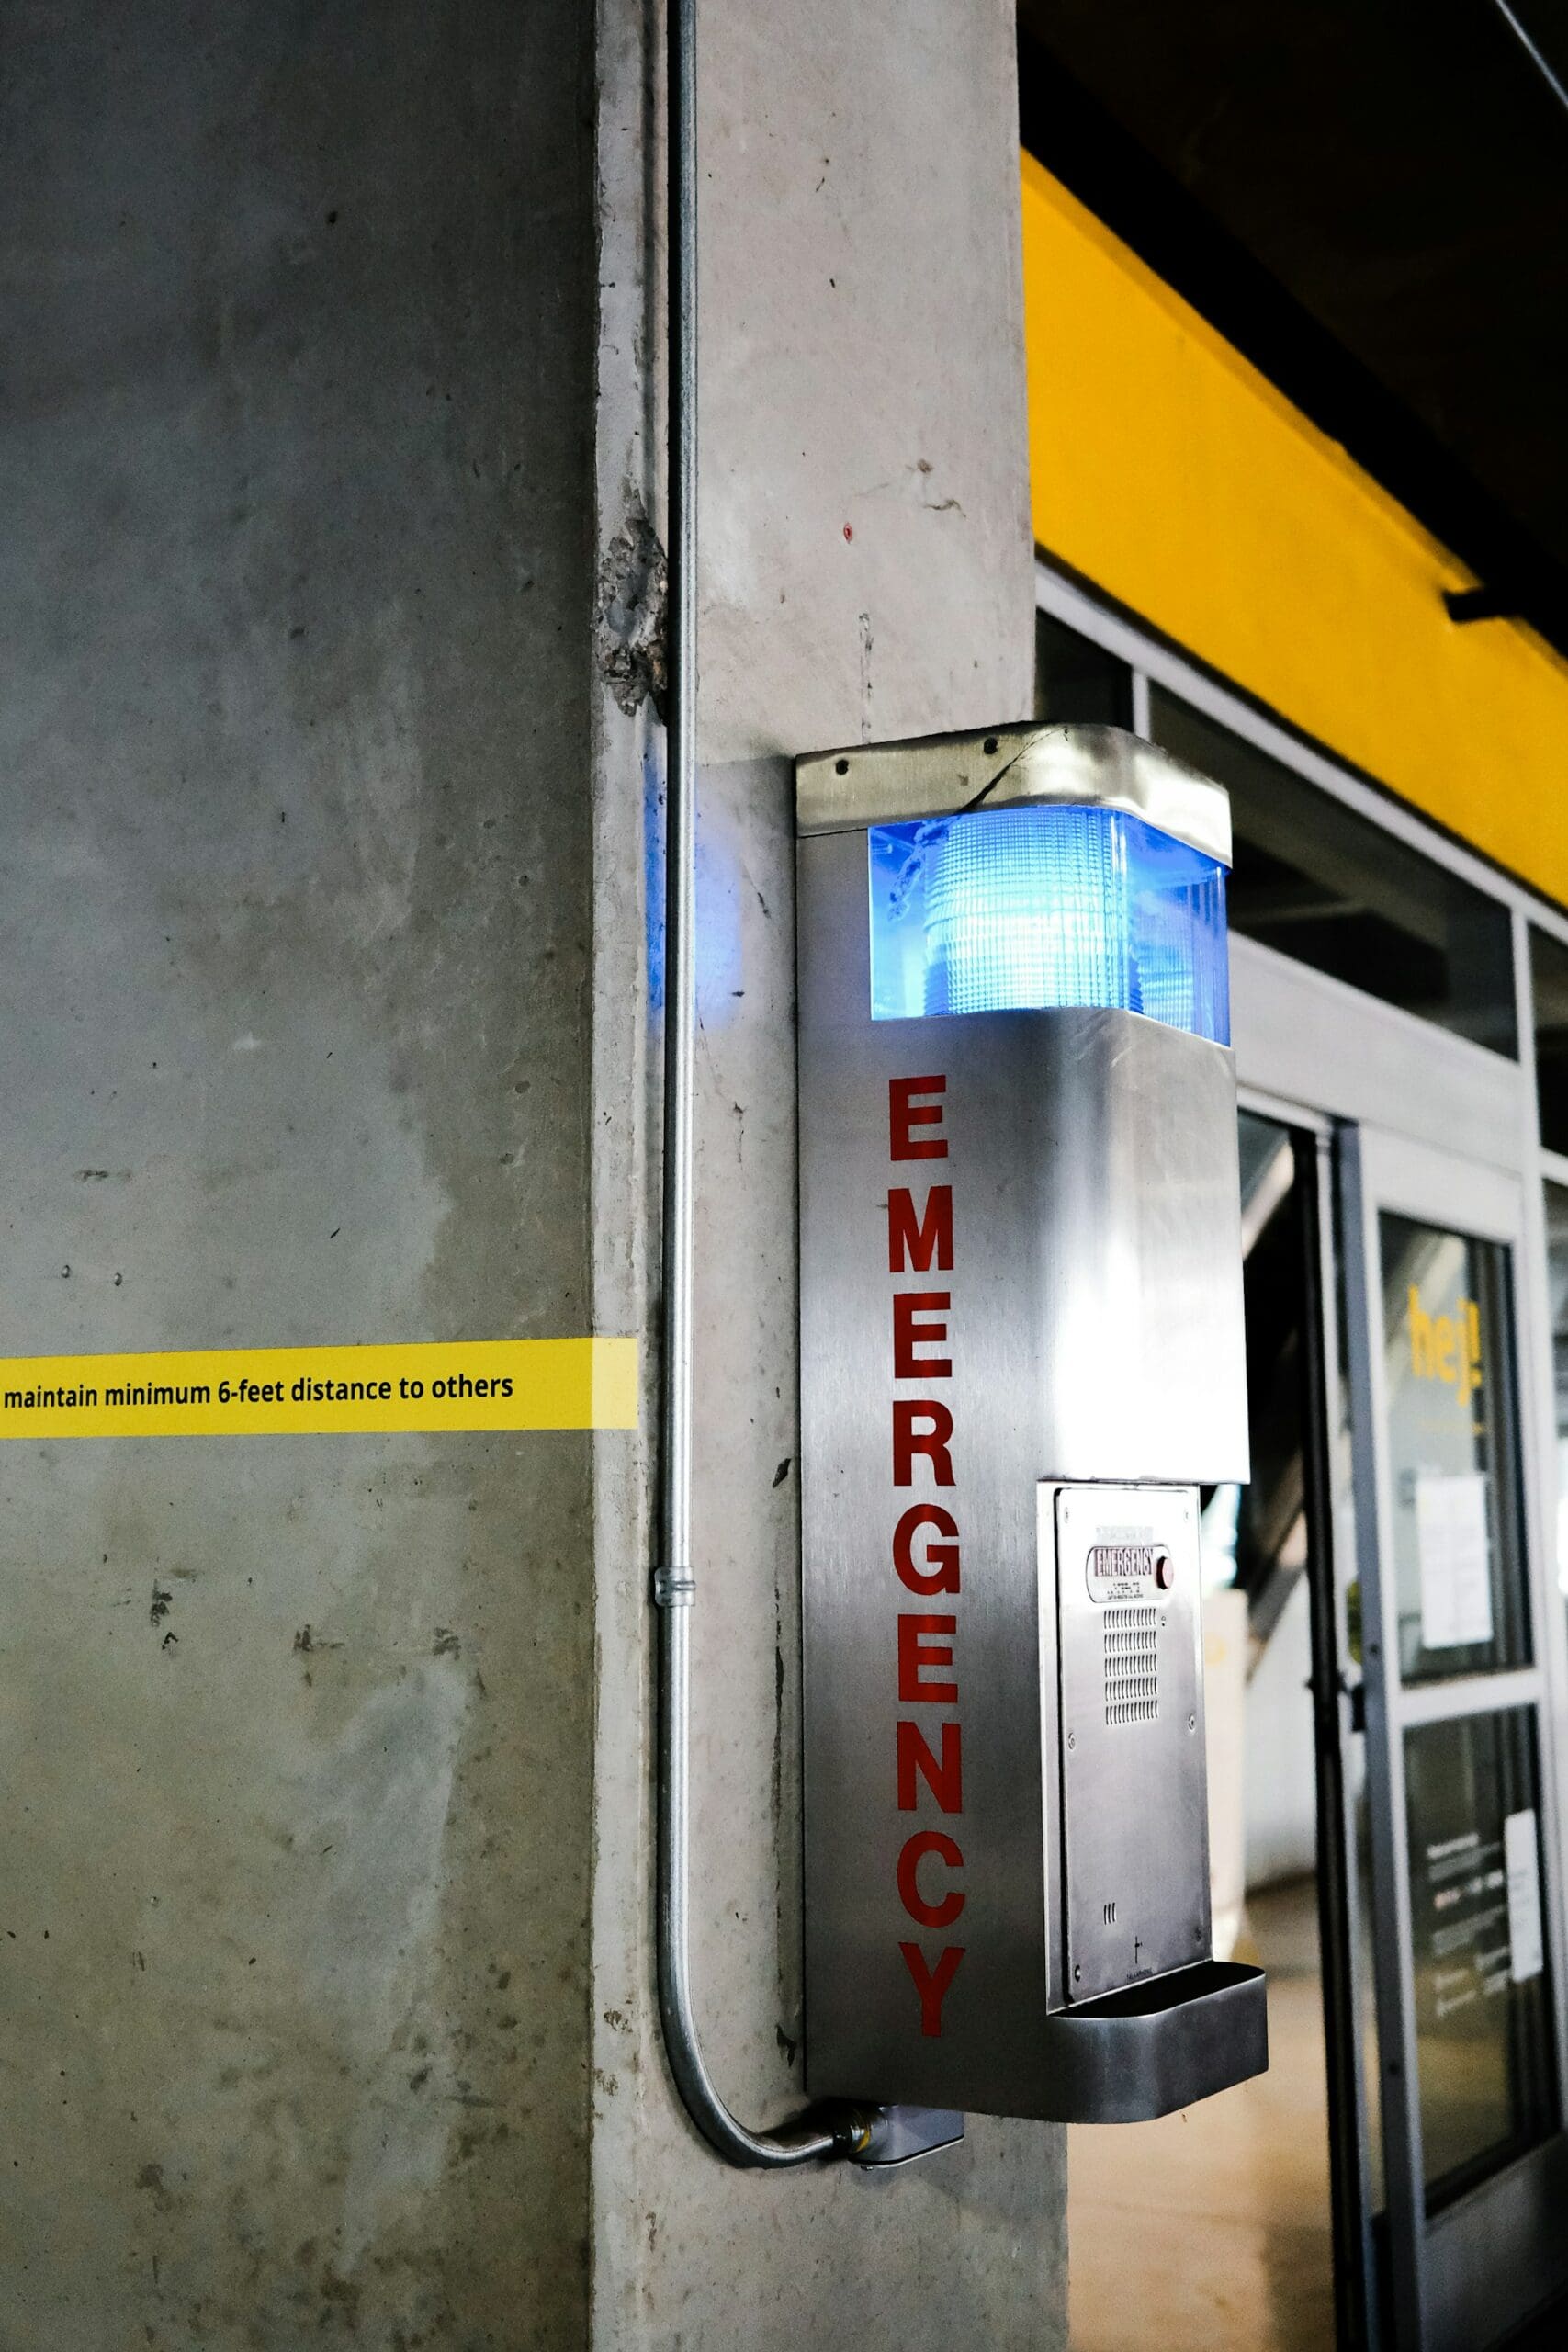 Selecting the Right Emergency Enclosure for Different Crisis Scenarios